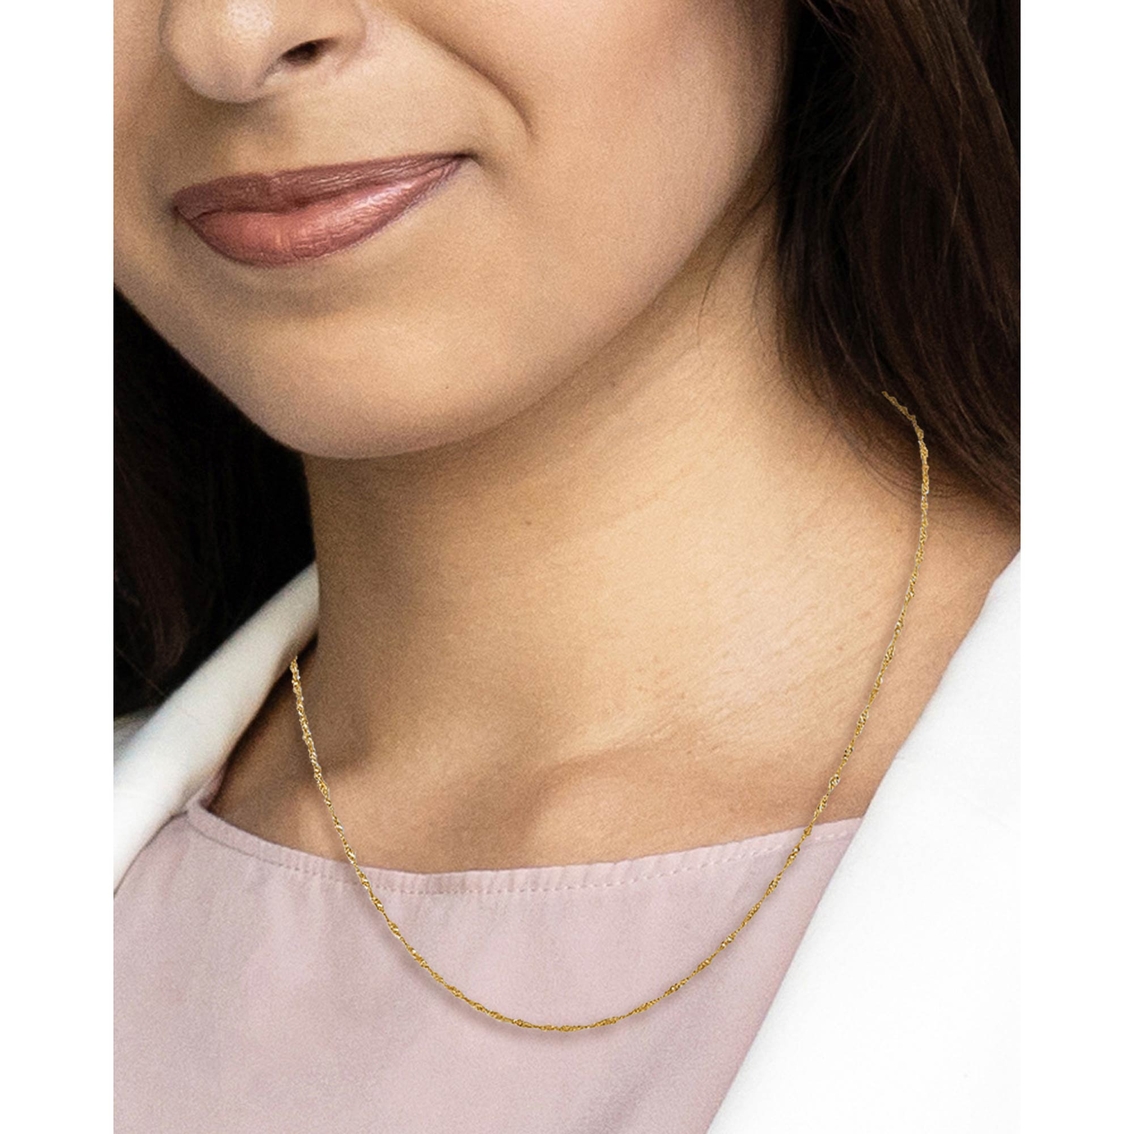 24K Pure Gold 1.6mm Singapore Chain Necklace - Image 5 of 7